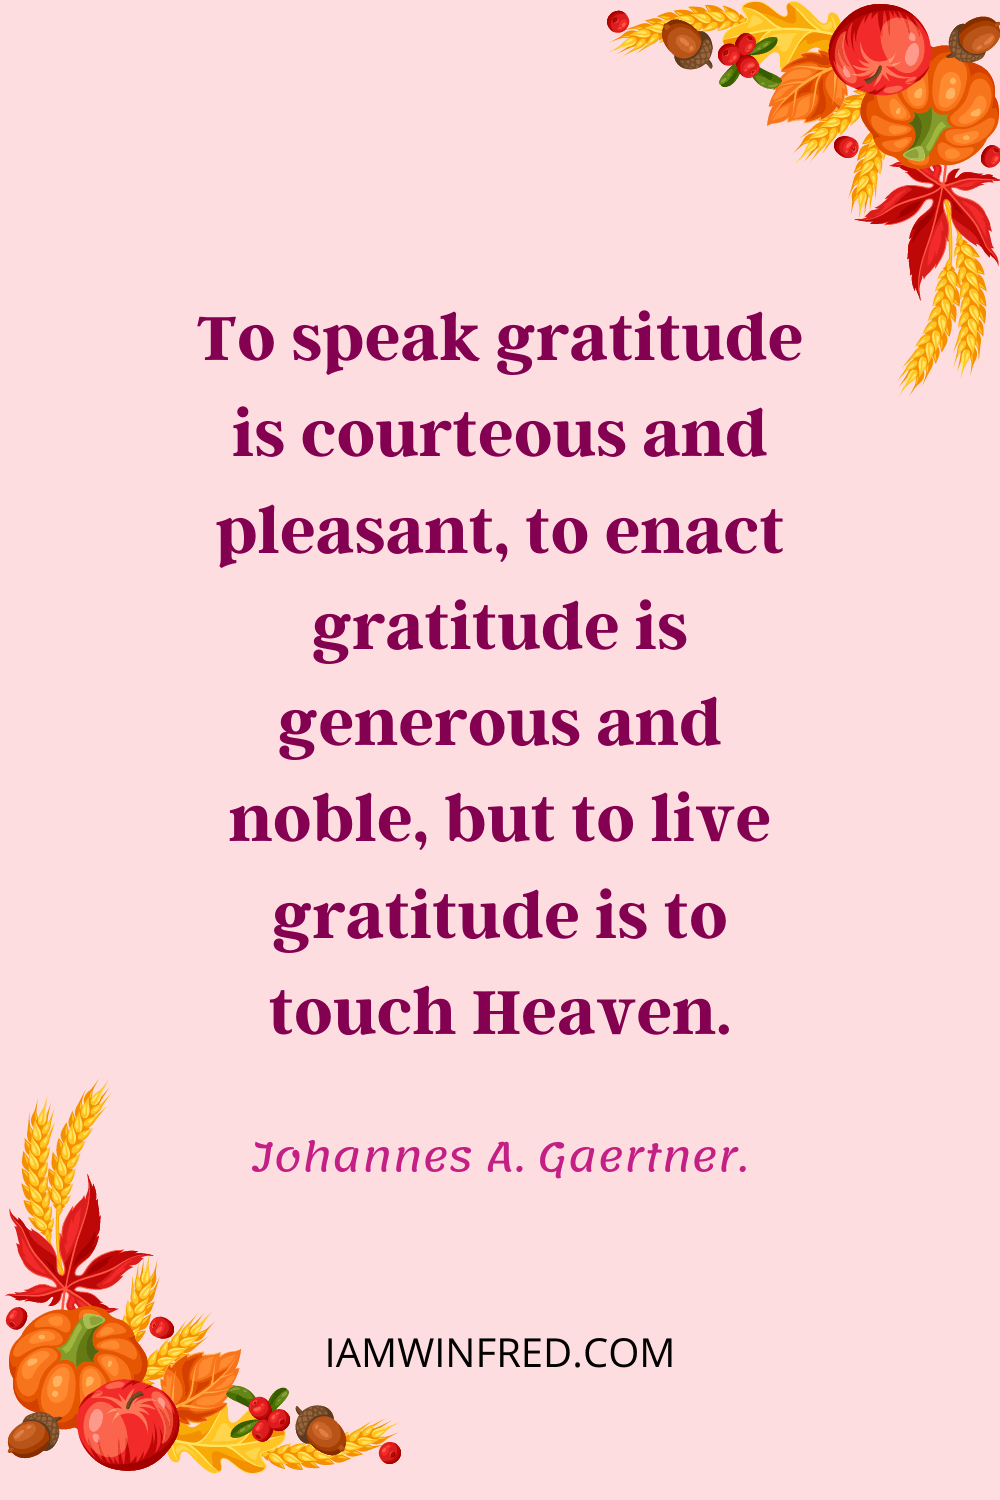 O Speak Gratitude Is Courteous And Pleasant To Enact Gratitude Is Generous And Noble But To Live Gratitude Is To Touch Heaven.